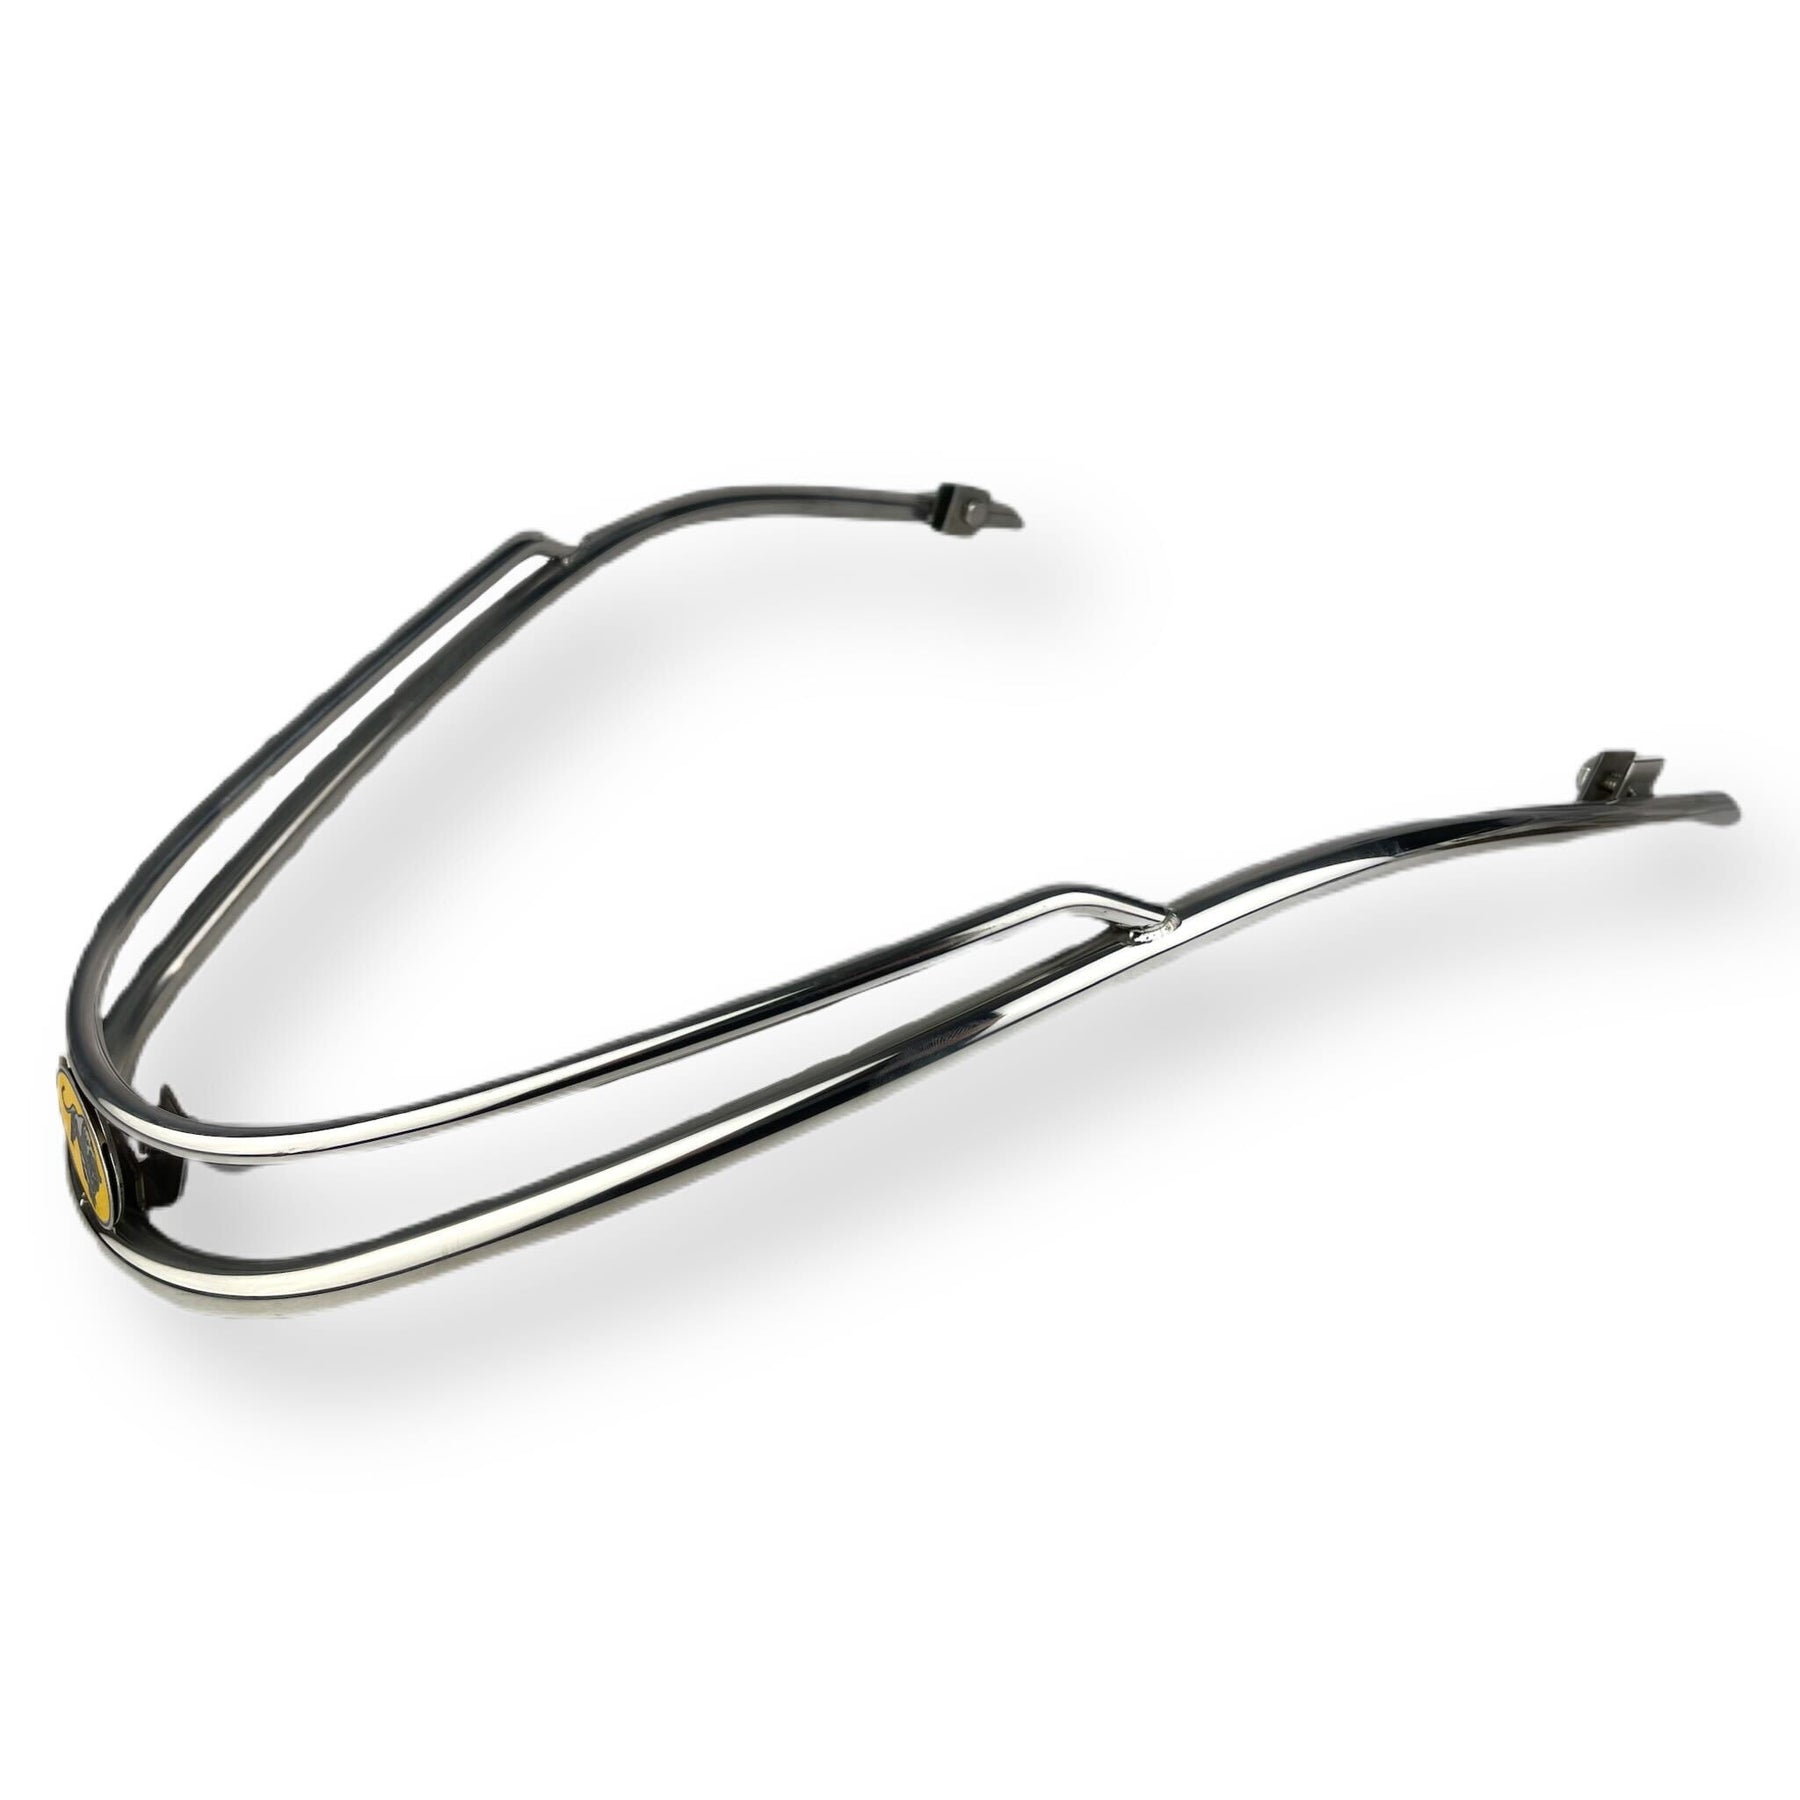 Royal Alloy Scomadi Front Bumper Bar - Curve Trim - Polished Stainless Steel